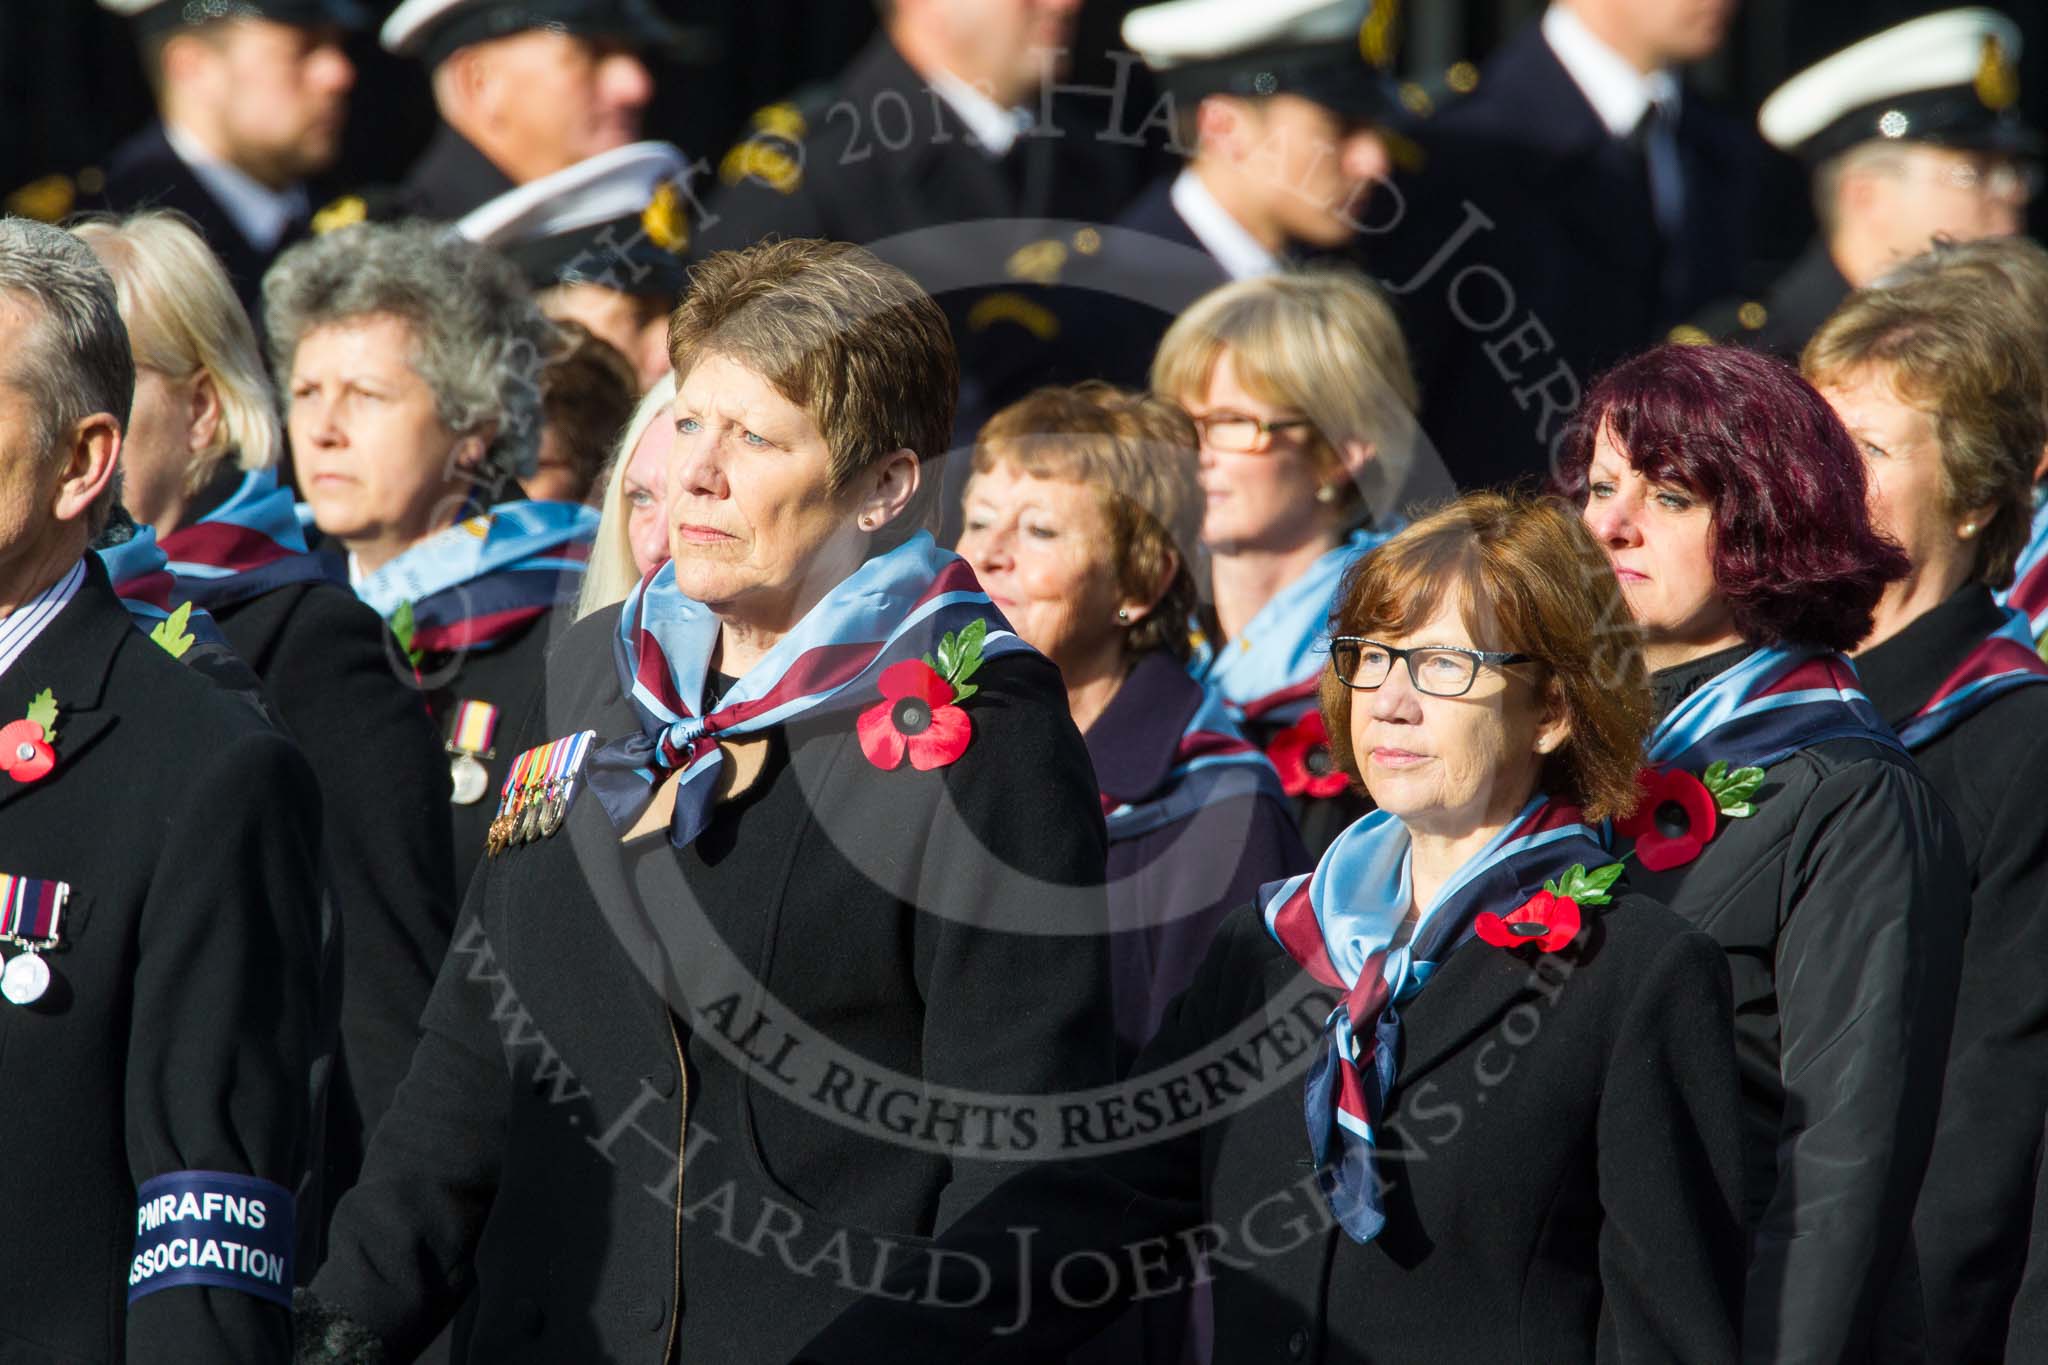 Remembrance Sunday at the Cenotaph in London 2014: Group C23 - Princess Mary's Royal Air Force Nursing Service
Association.
Press stand opposite the Foreign Office building, Whitehall, London SW1,
London,
Greater London,
United Kingdom,
on 09 November 2014 at 11:41, image #195